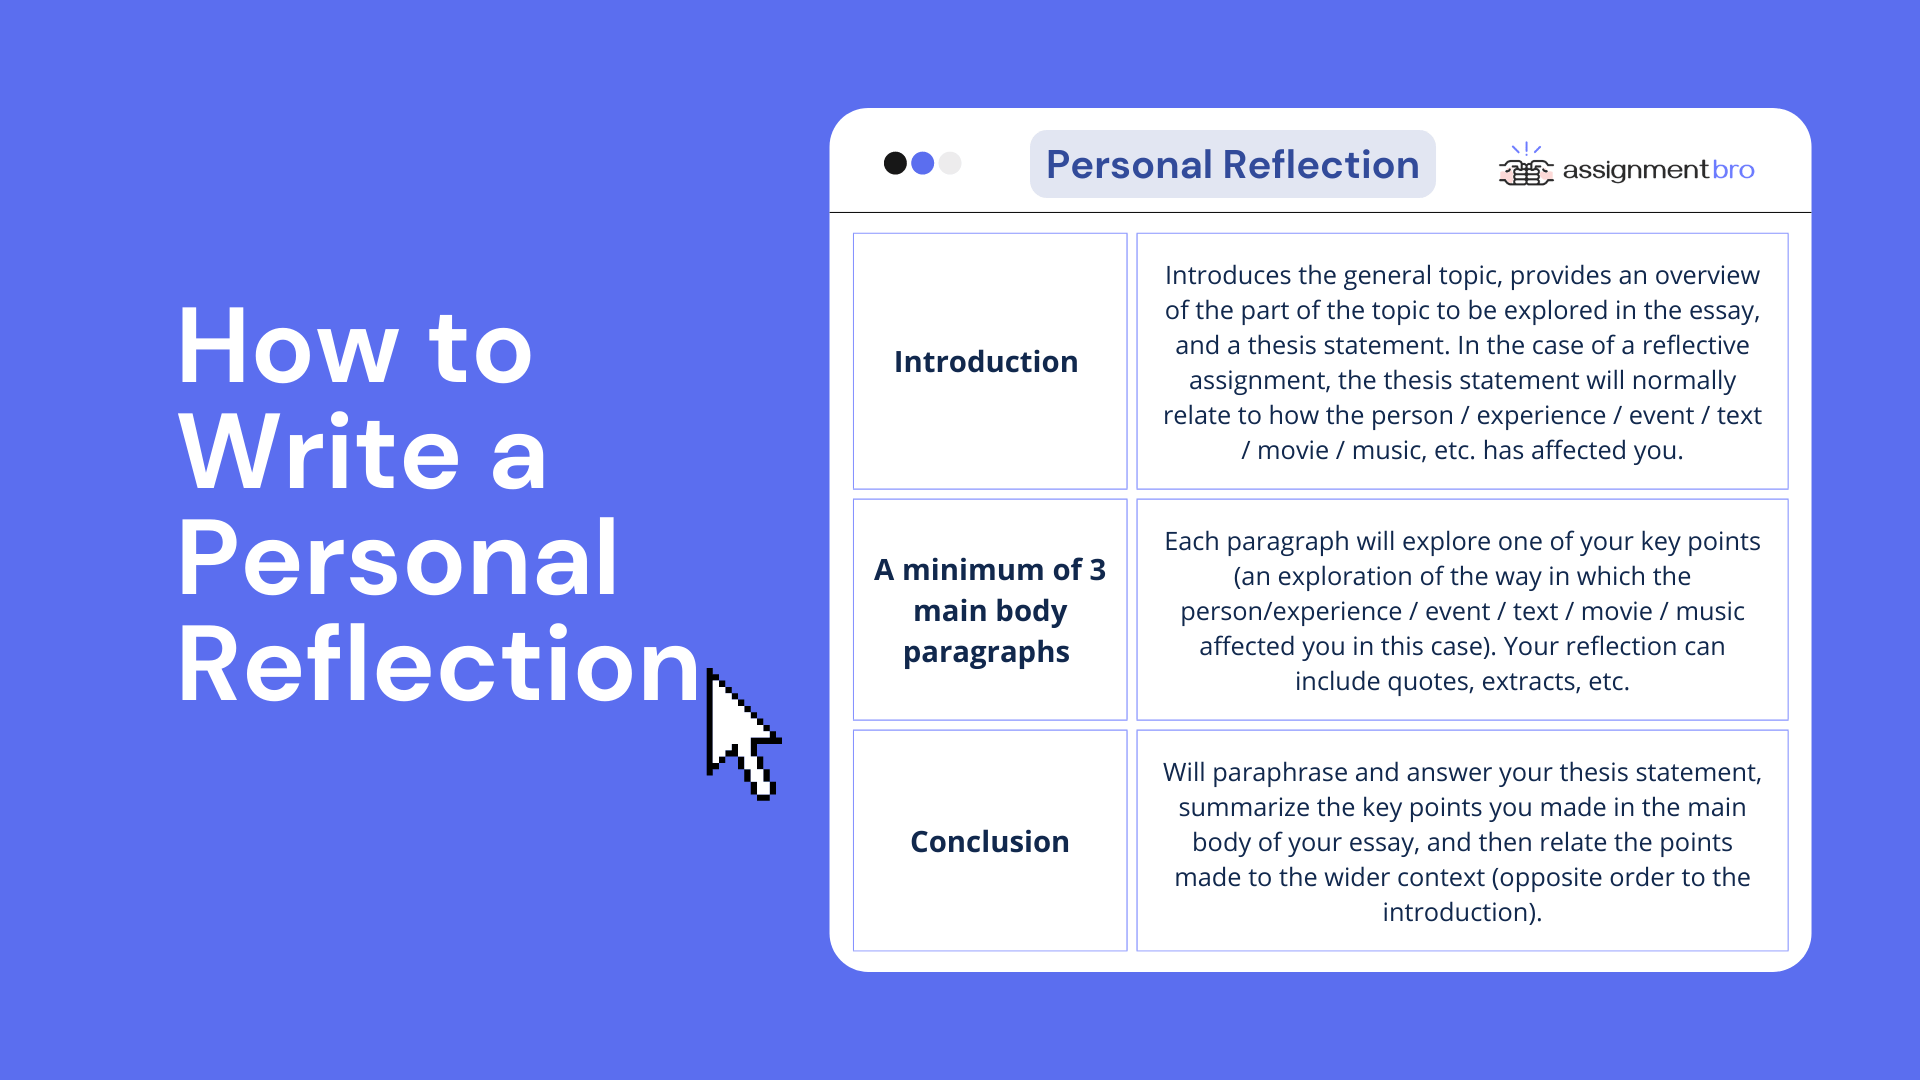 How to Write a Personal Reflection